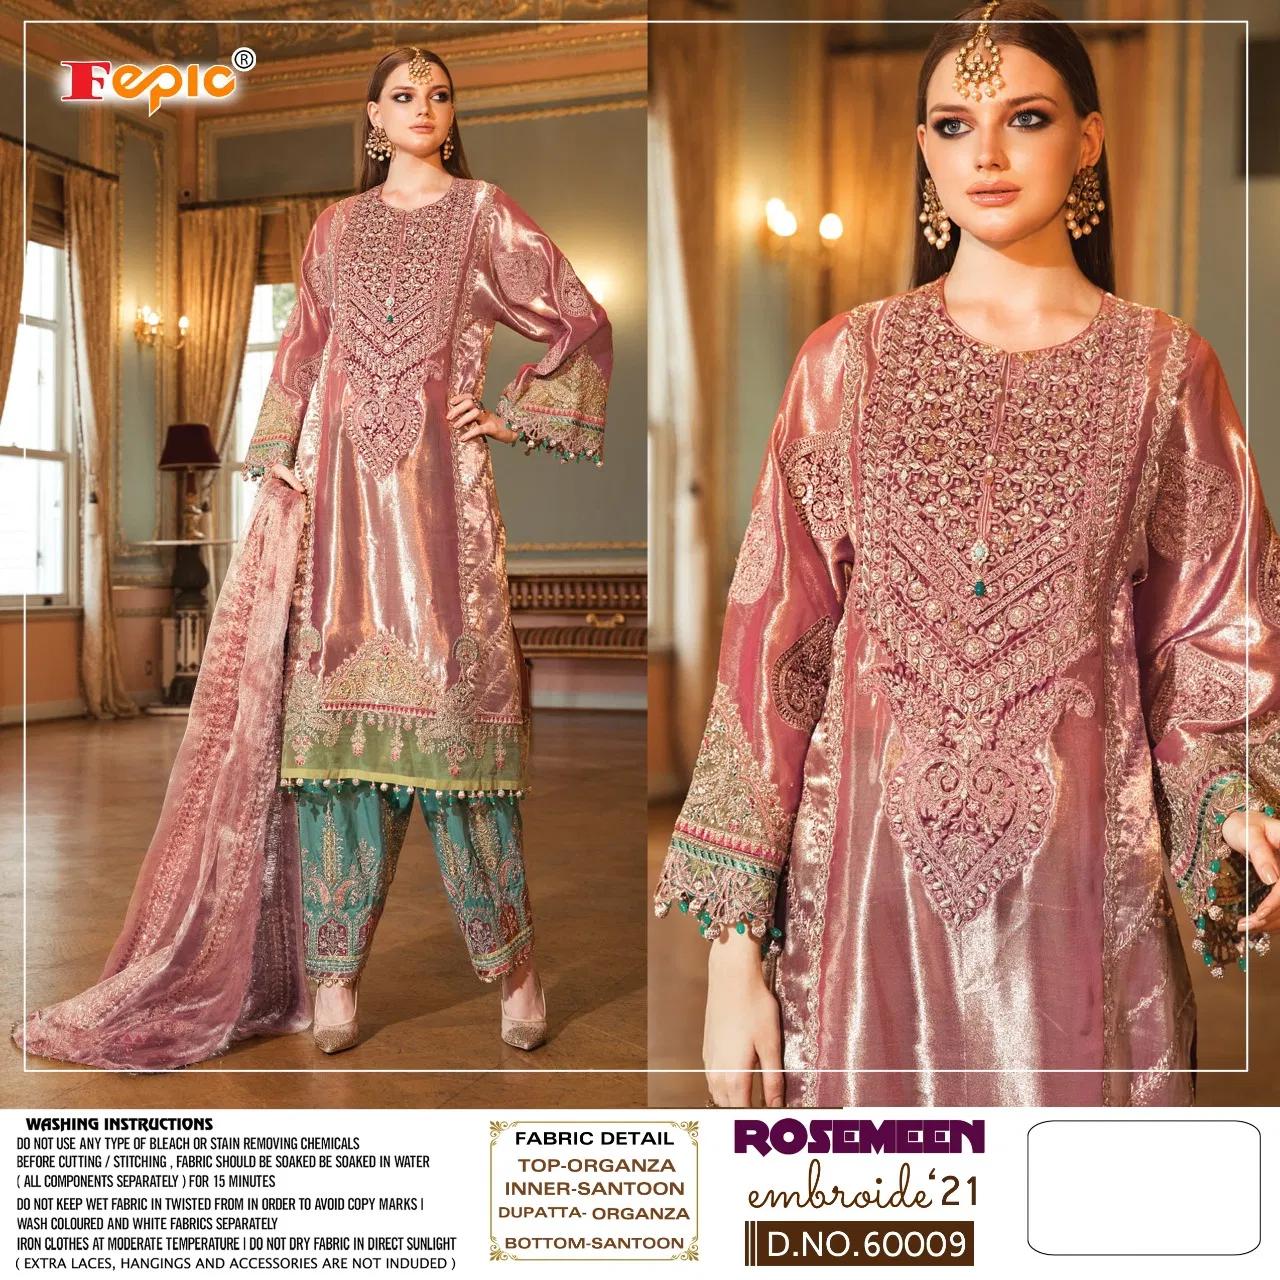 FEPIC EMBROIDE 60009 EMBROIDE 21 WHOLESALE